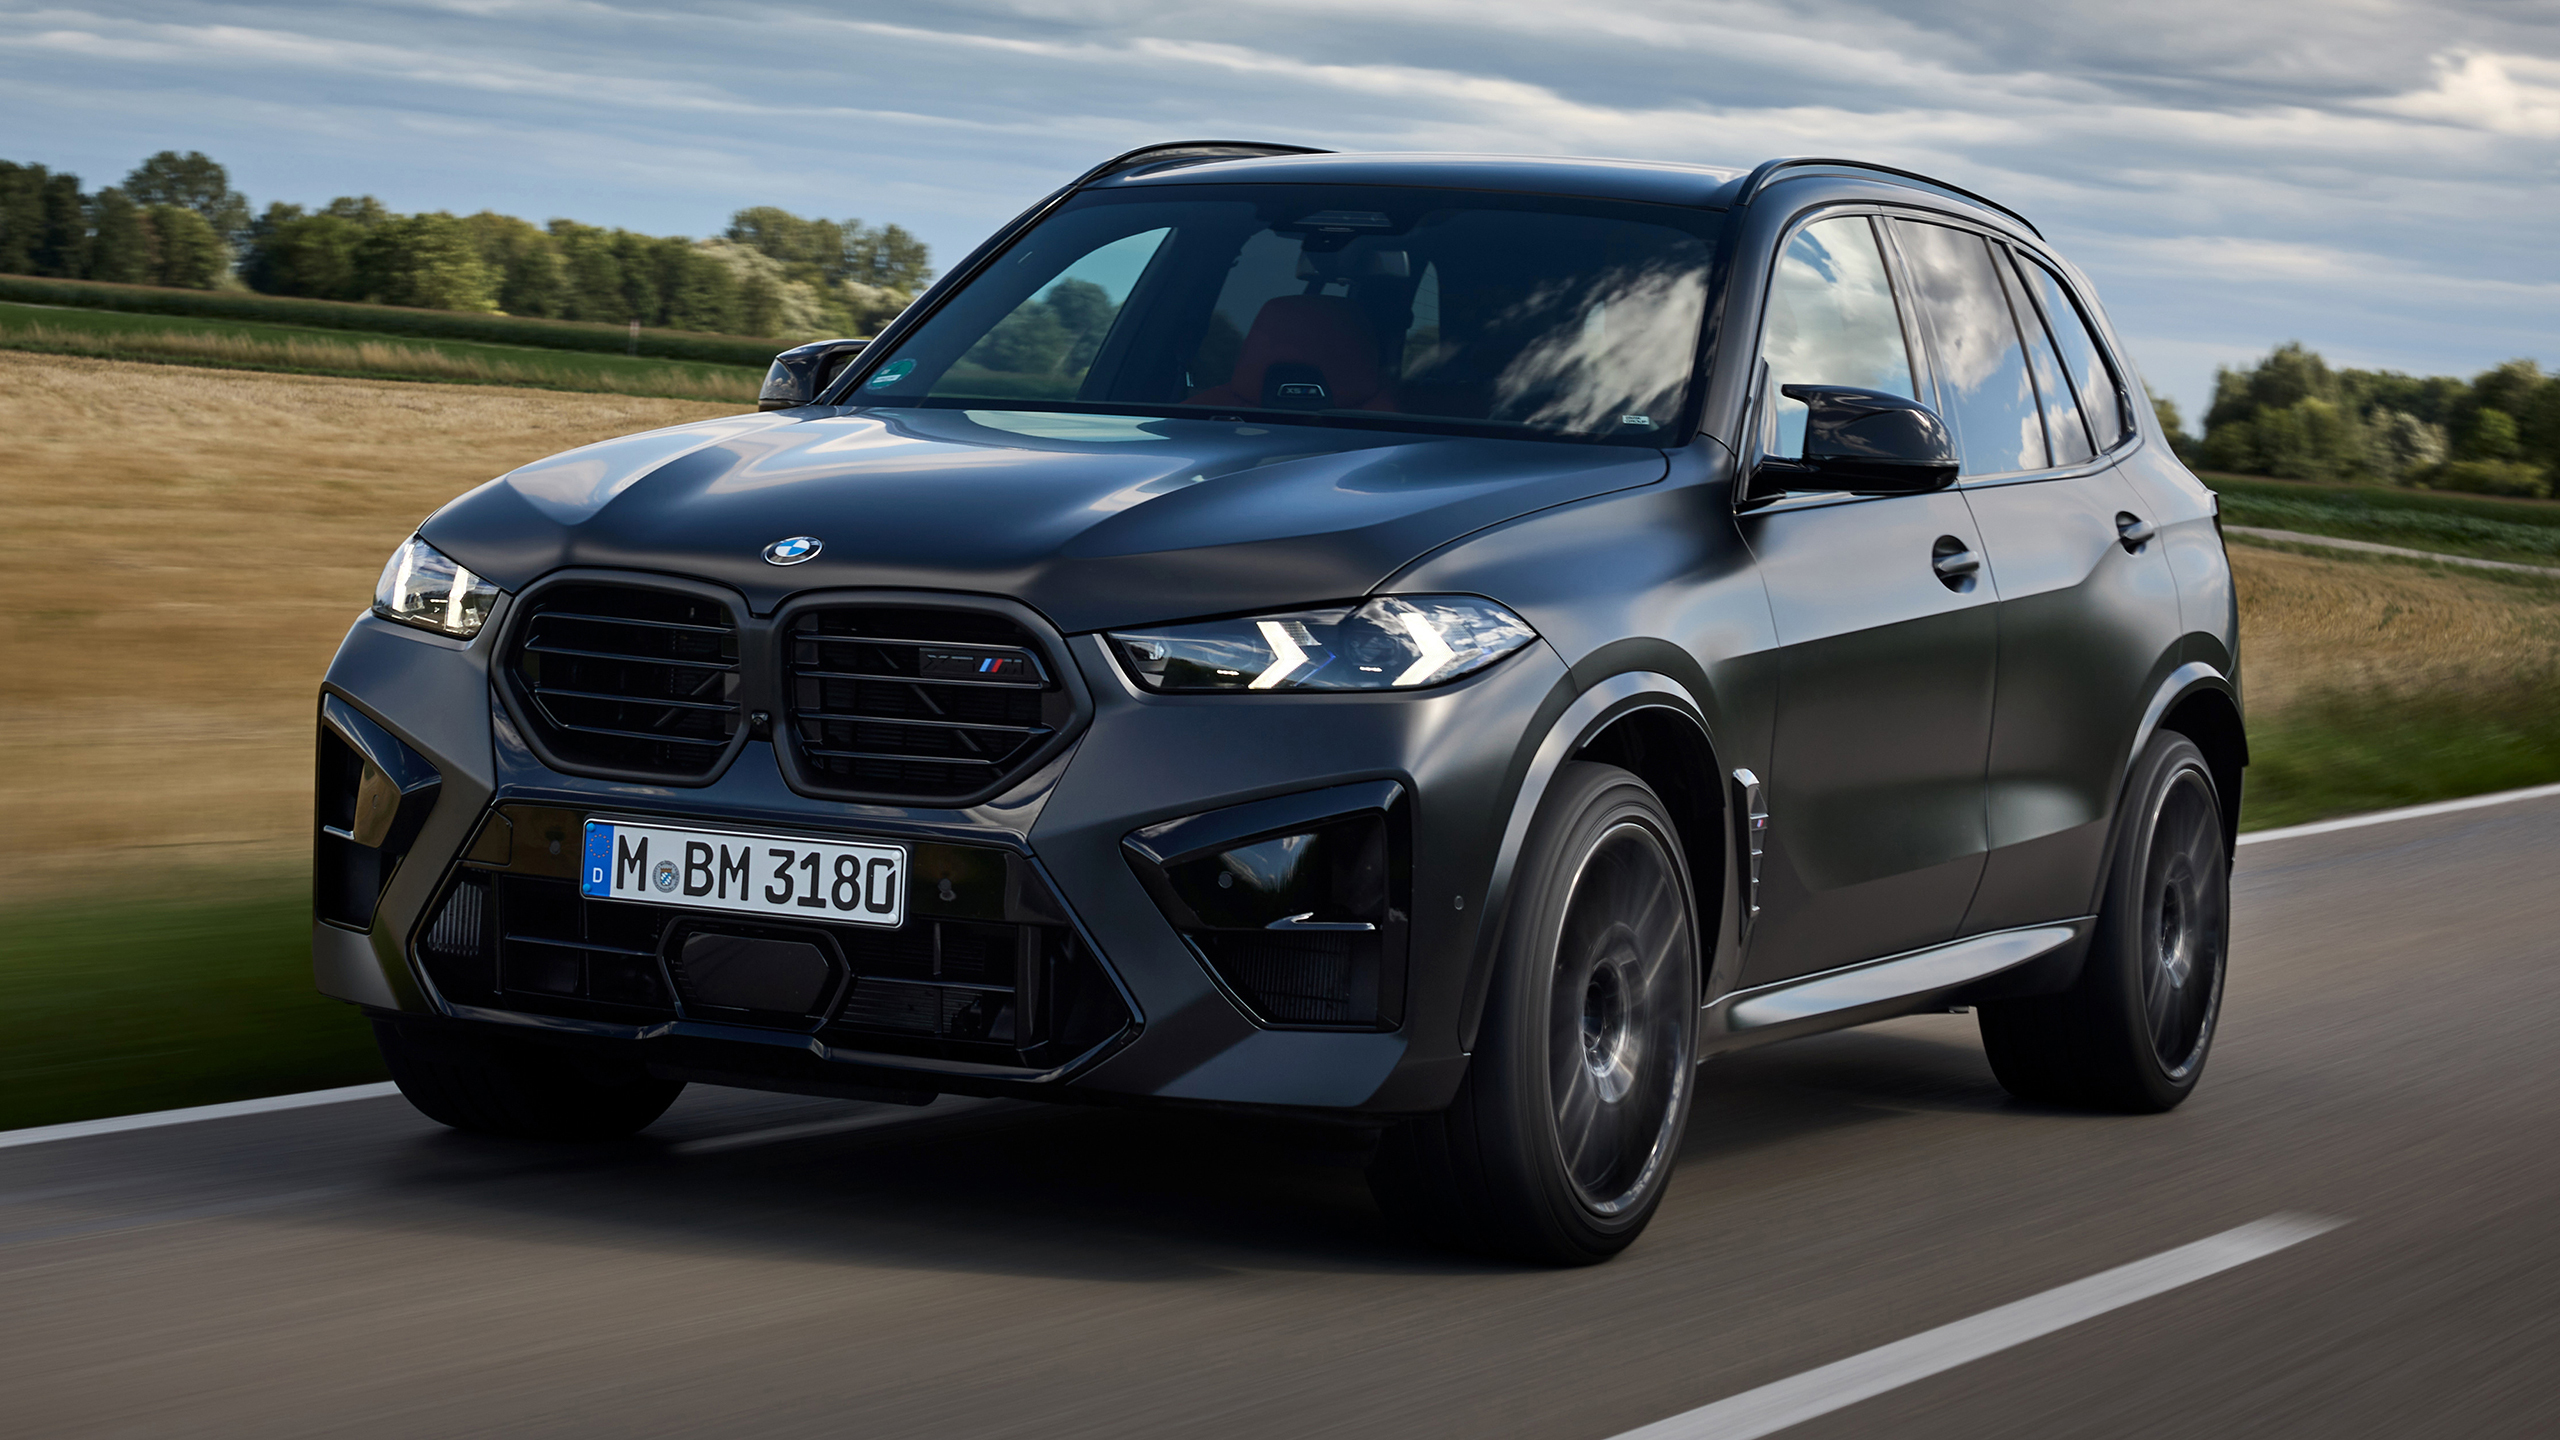 Bmw X5 And X6 Facelift Them From Every Angle In New